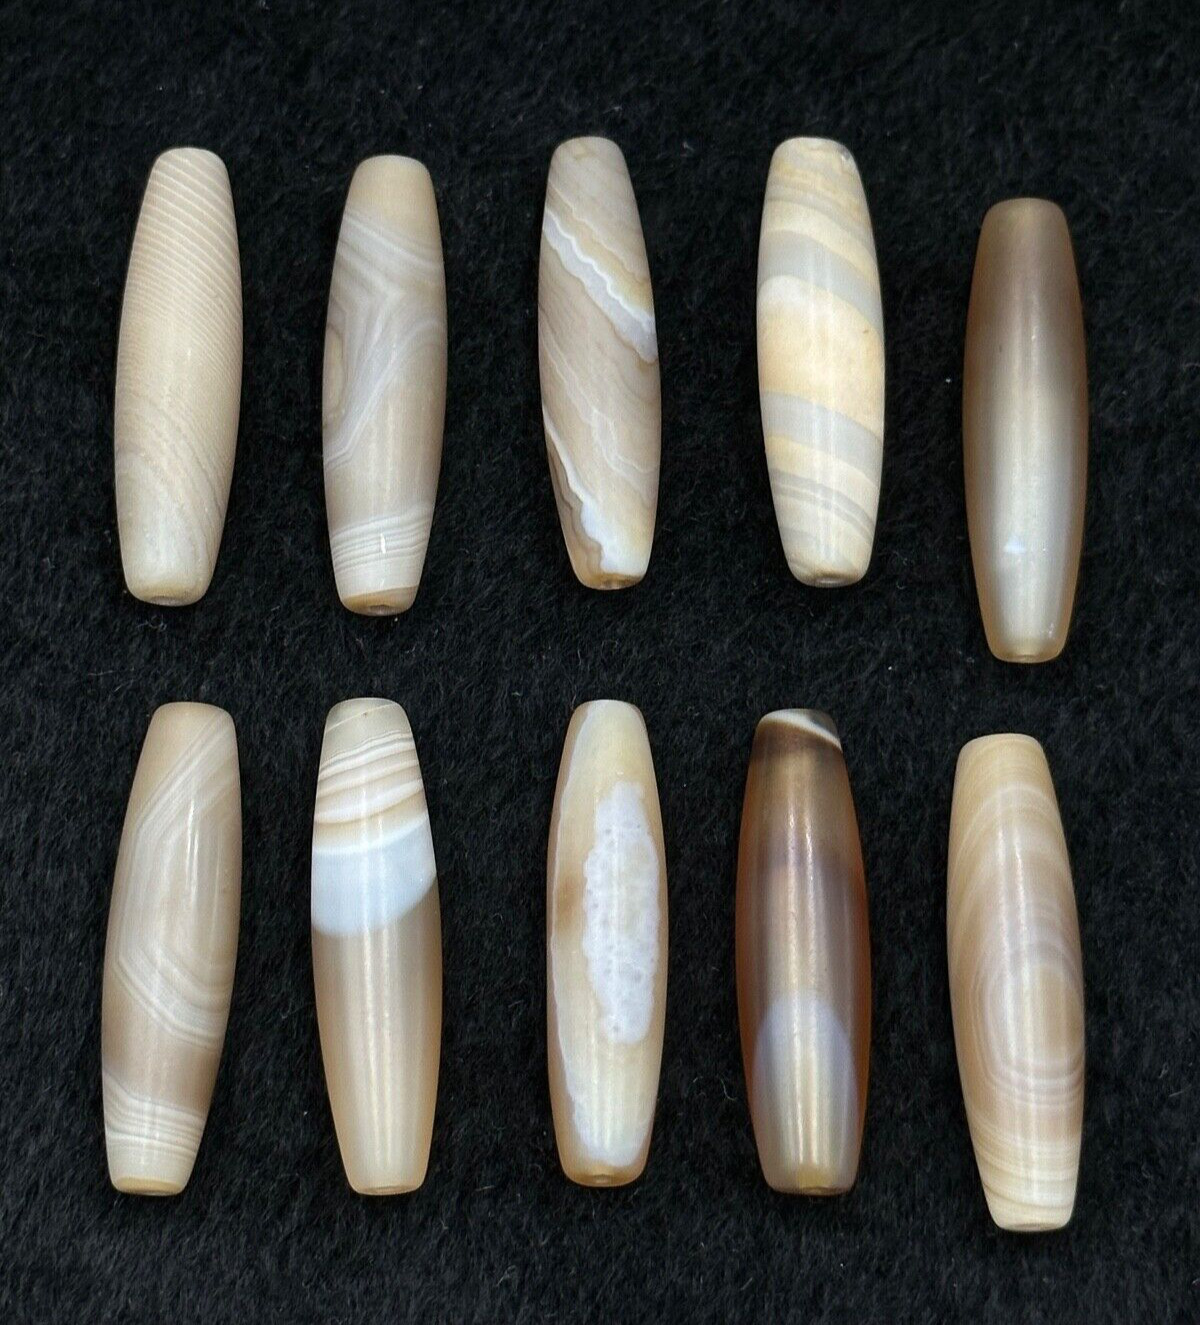 Lot 10 Pieces Long Ancient Greco Bactrian Banded Agate Stone Dzi Bead